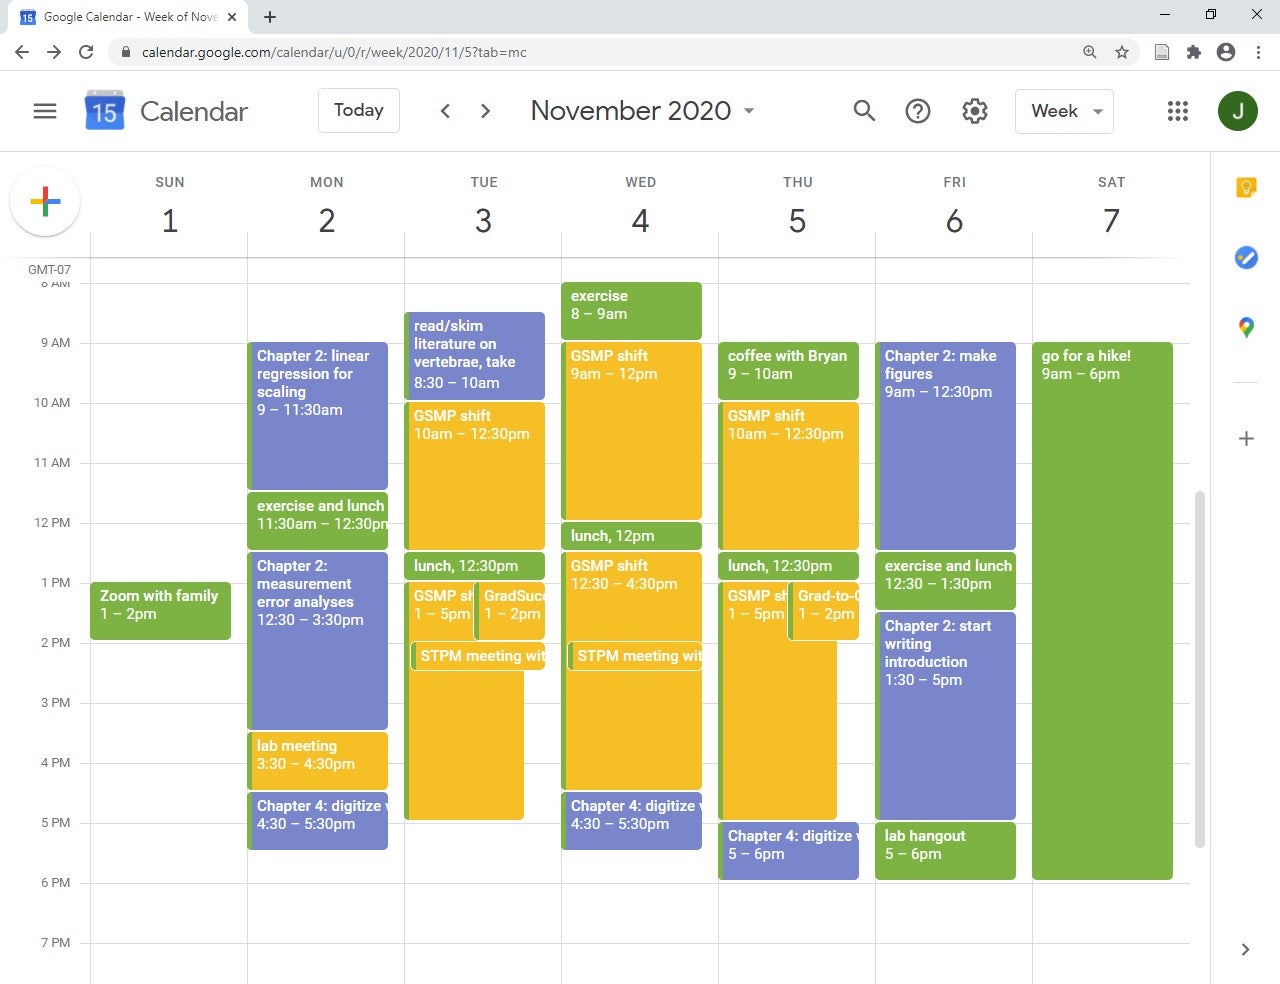 This screenshot shows a week from a Google calendar. Items are color-coded by category: meetings and shifts at work are in yellow; research-related tasks are in purple; non-work tasks such as exercise, coffee with a friend, and a weekend hike are in green.